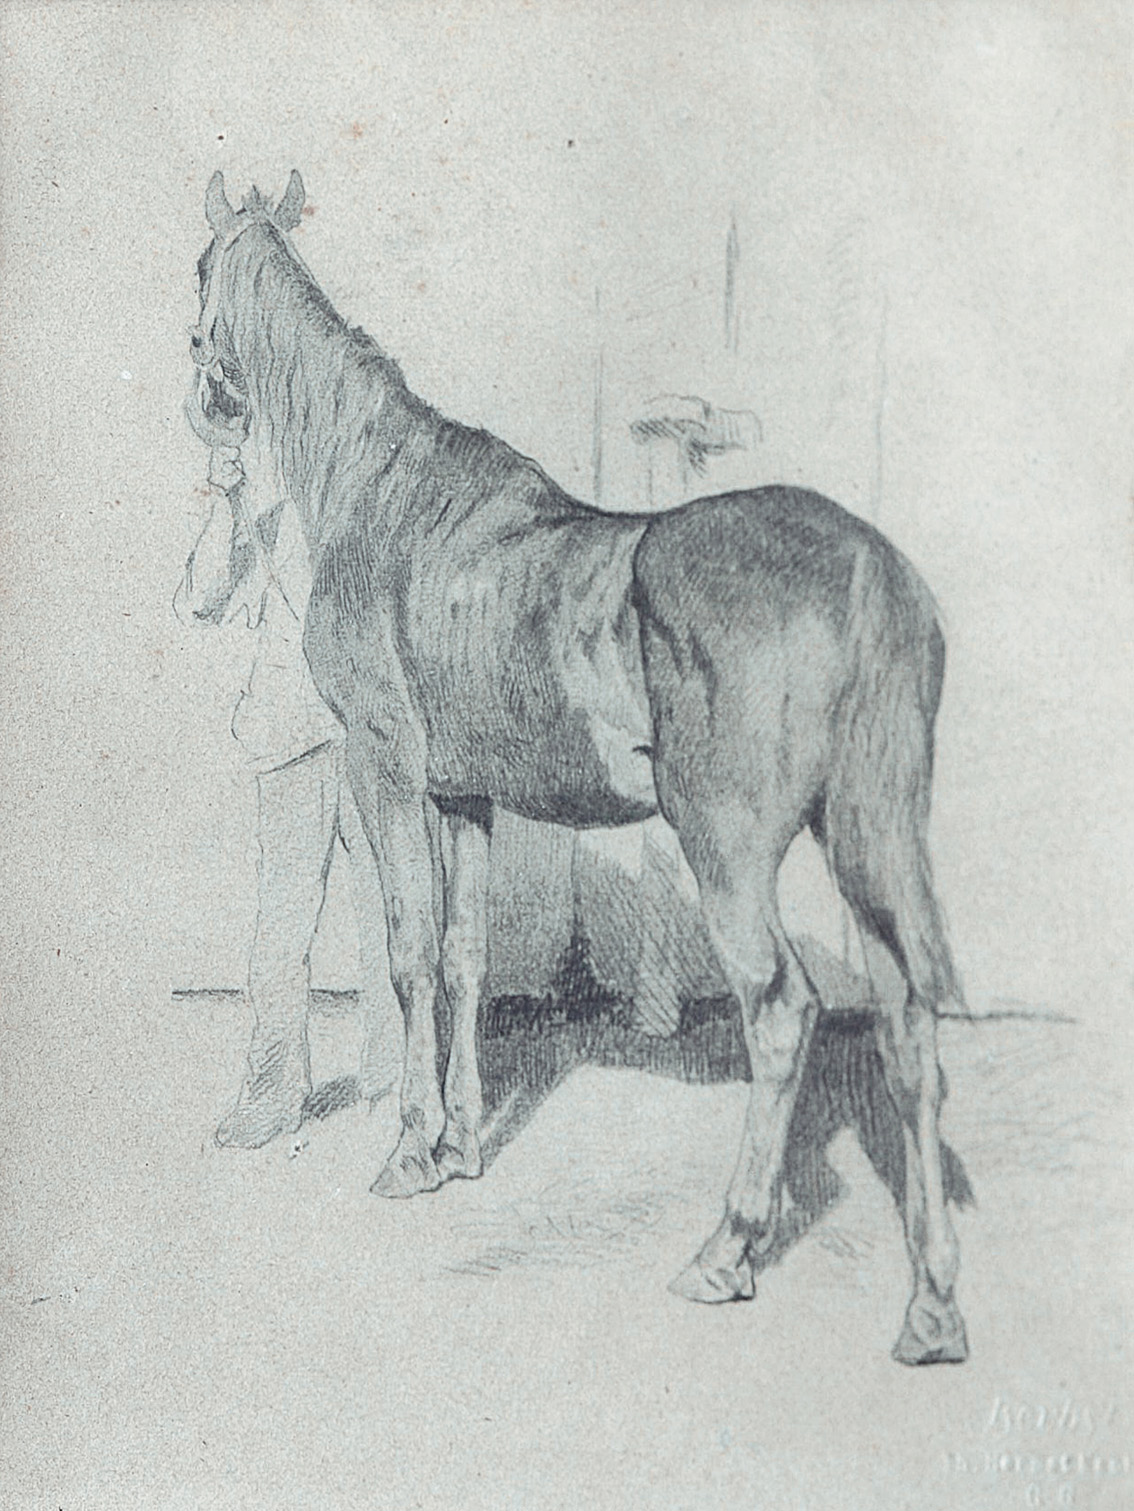 A horse and its owner